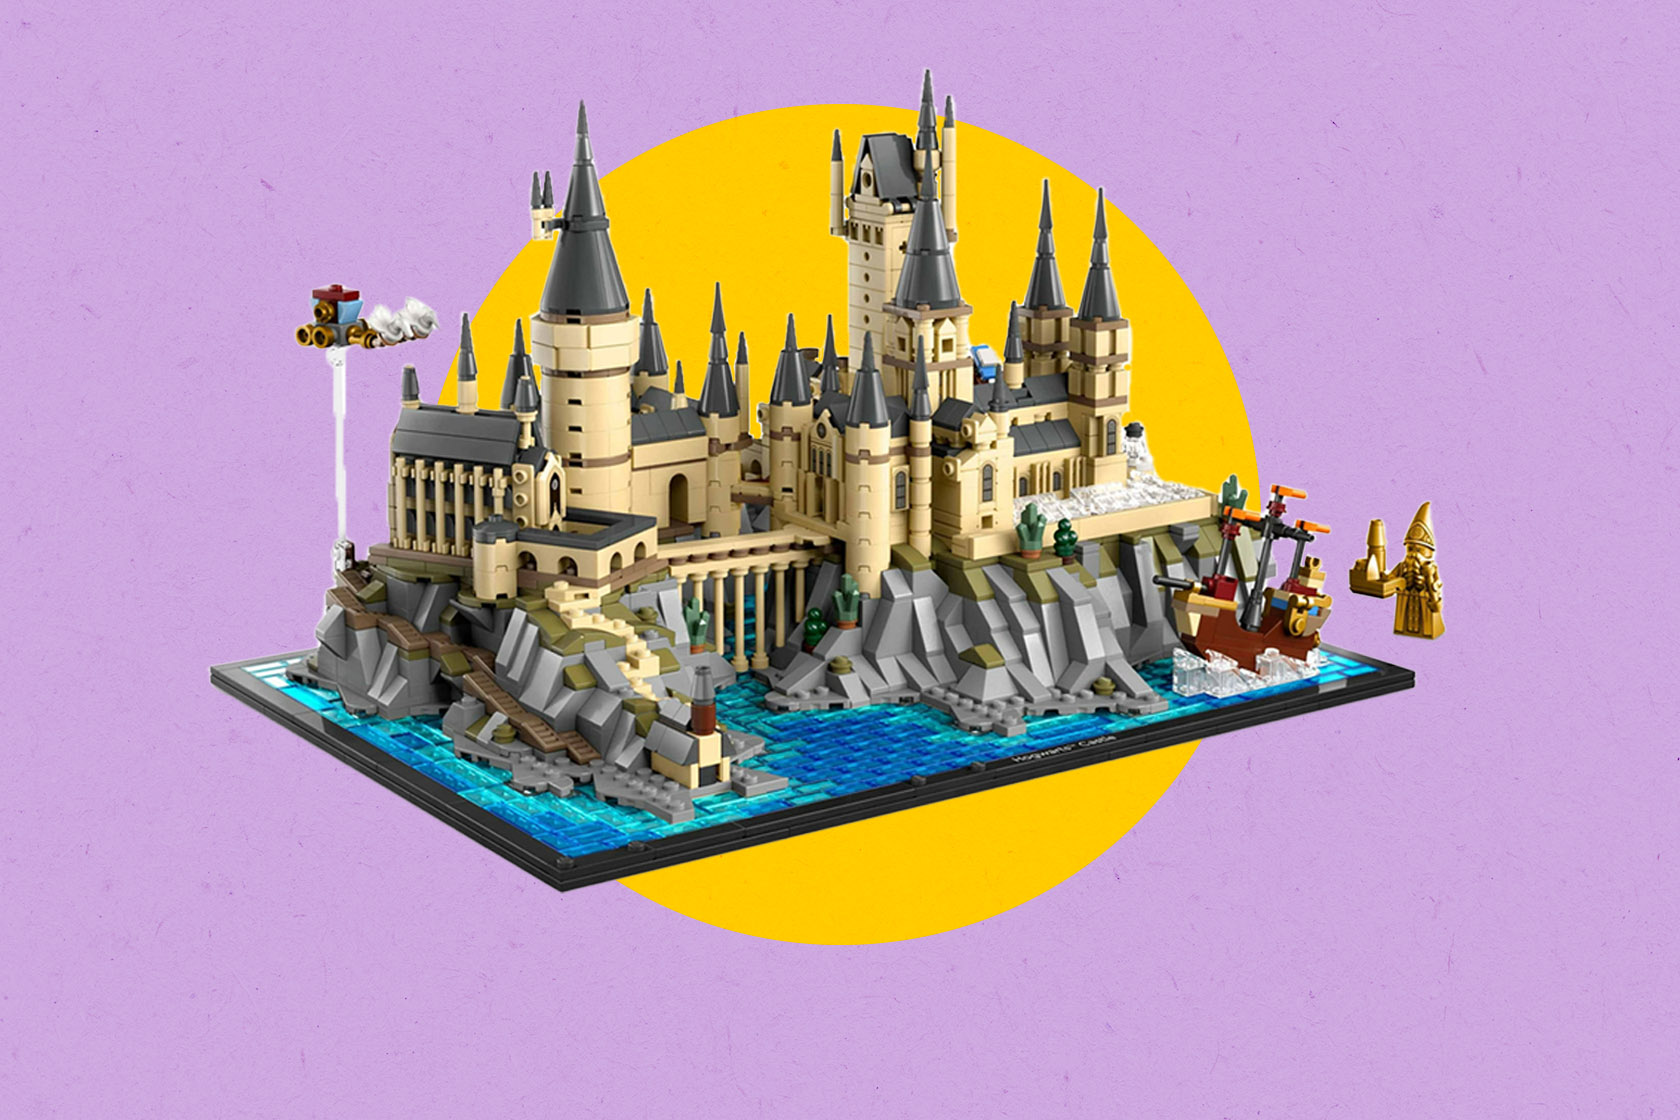 20 Must-Have Harry Potter Lego Sets - ReignOfReads